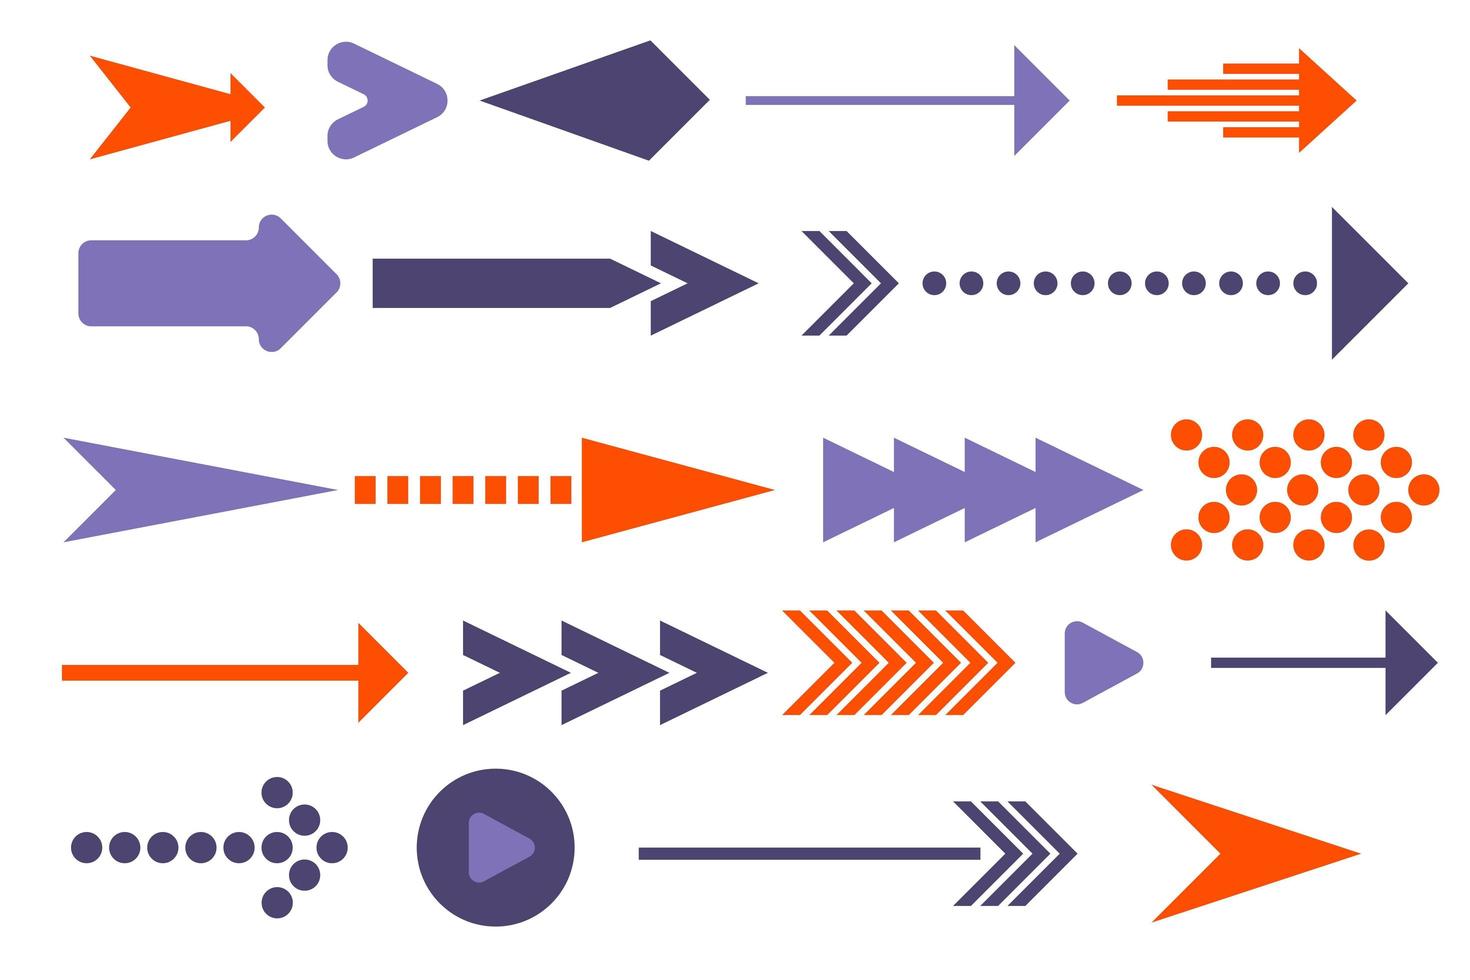 Arrows in different shapes vector